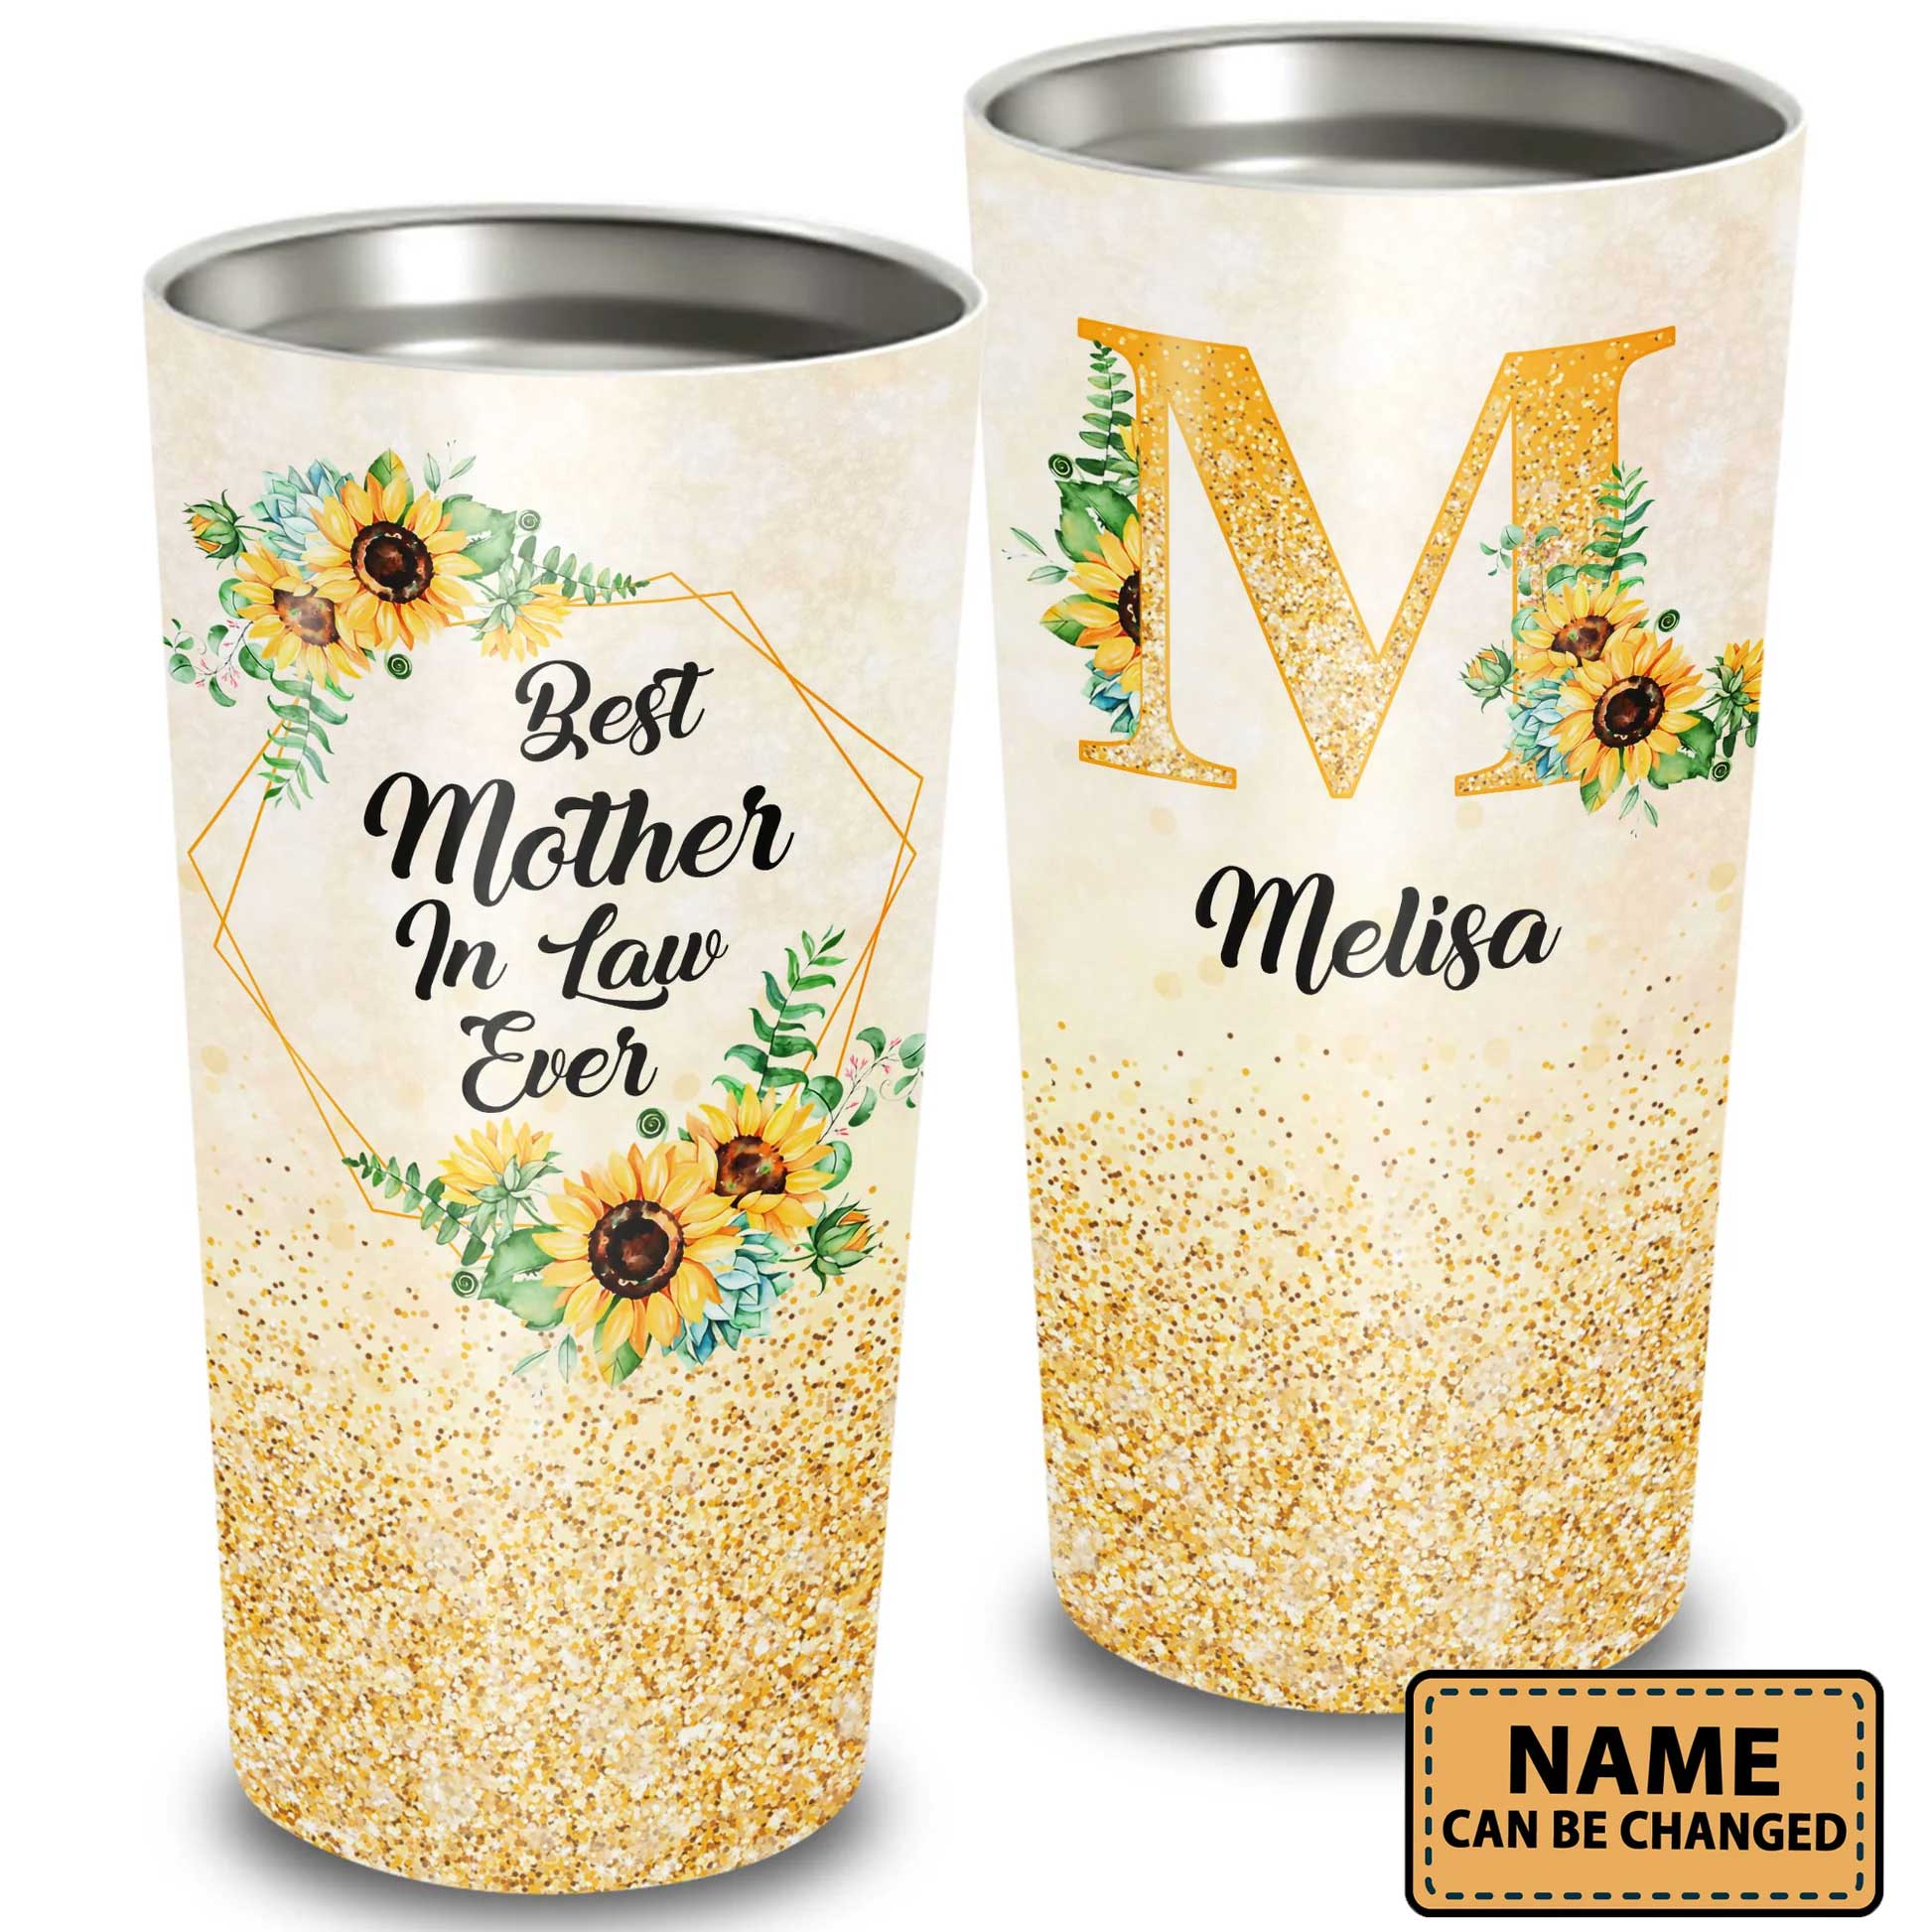 Personalized Mother's Day Gift Tumbler - Custom Gift For Mother's Day, Presents for Mom, Mother-In-Law - Sunflower, Best Mother In Law Ever Tumbler